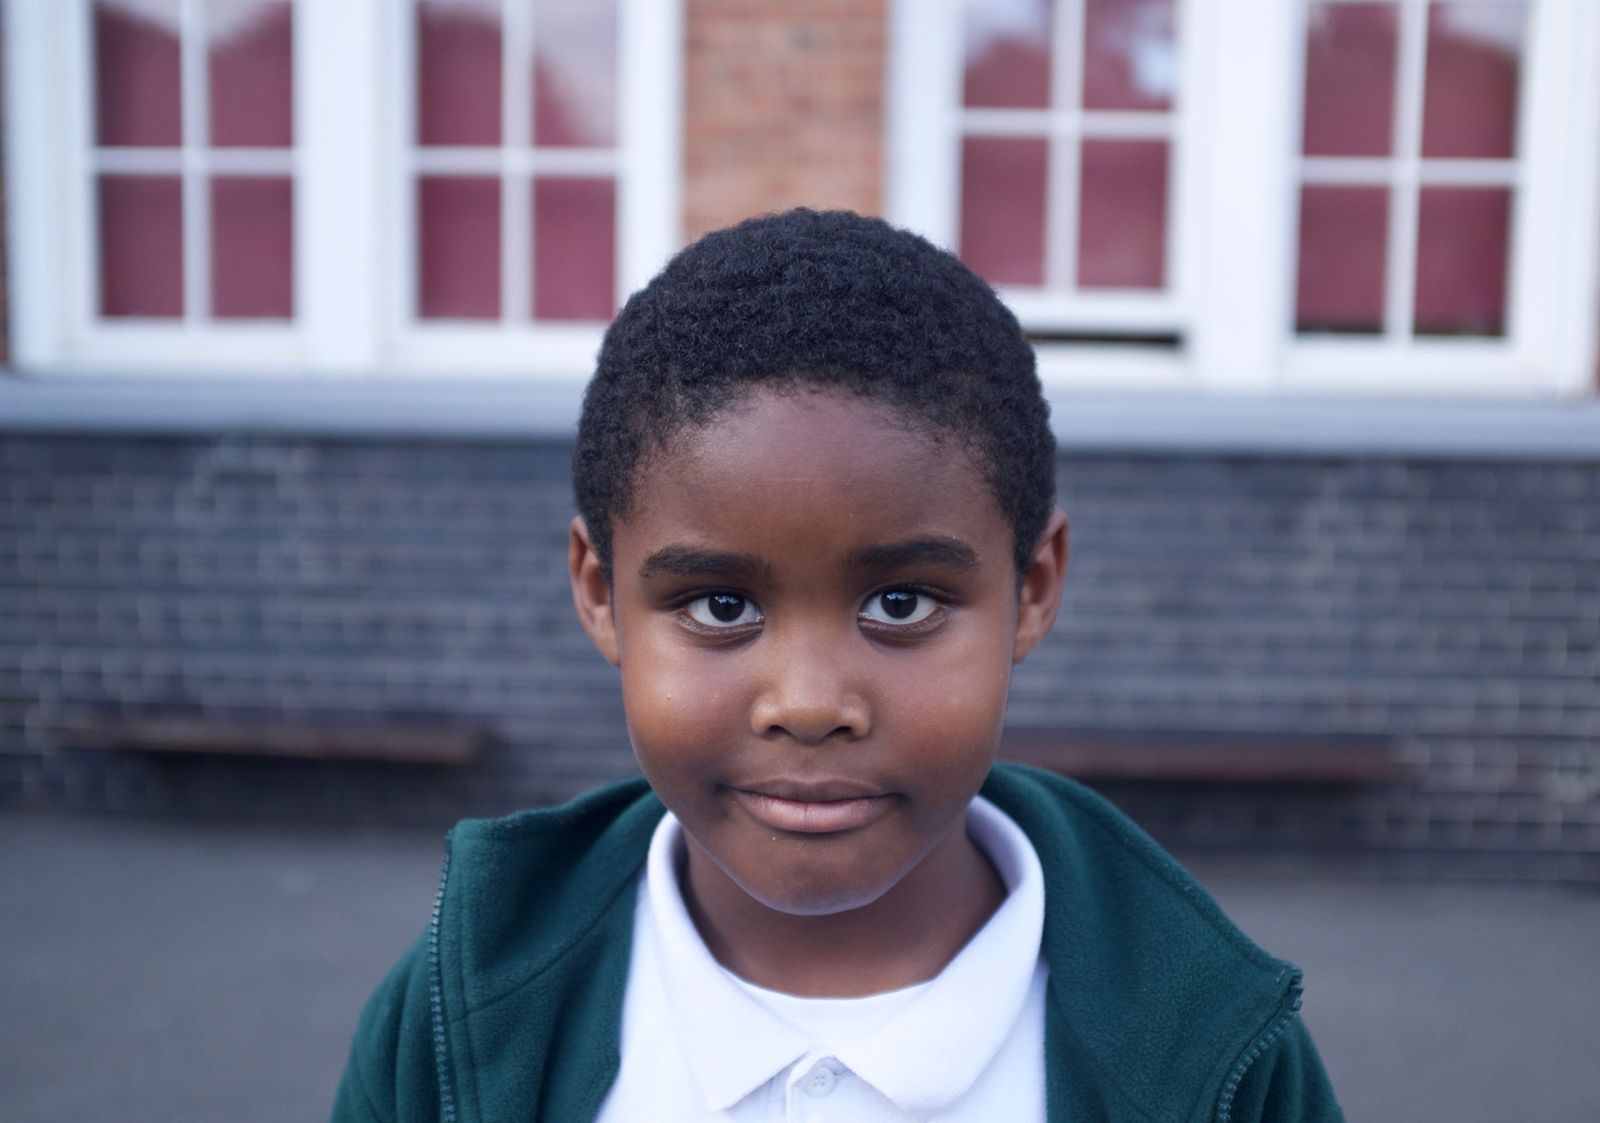 © Manal Massalha - Image from the A School in hackney - East London photography project